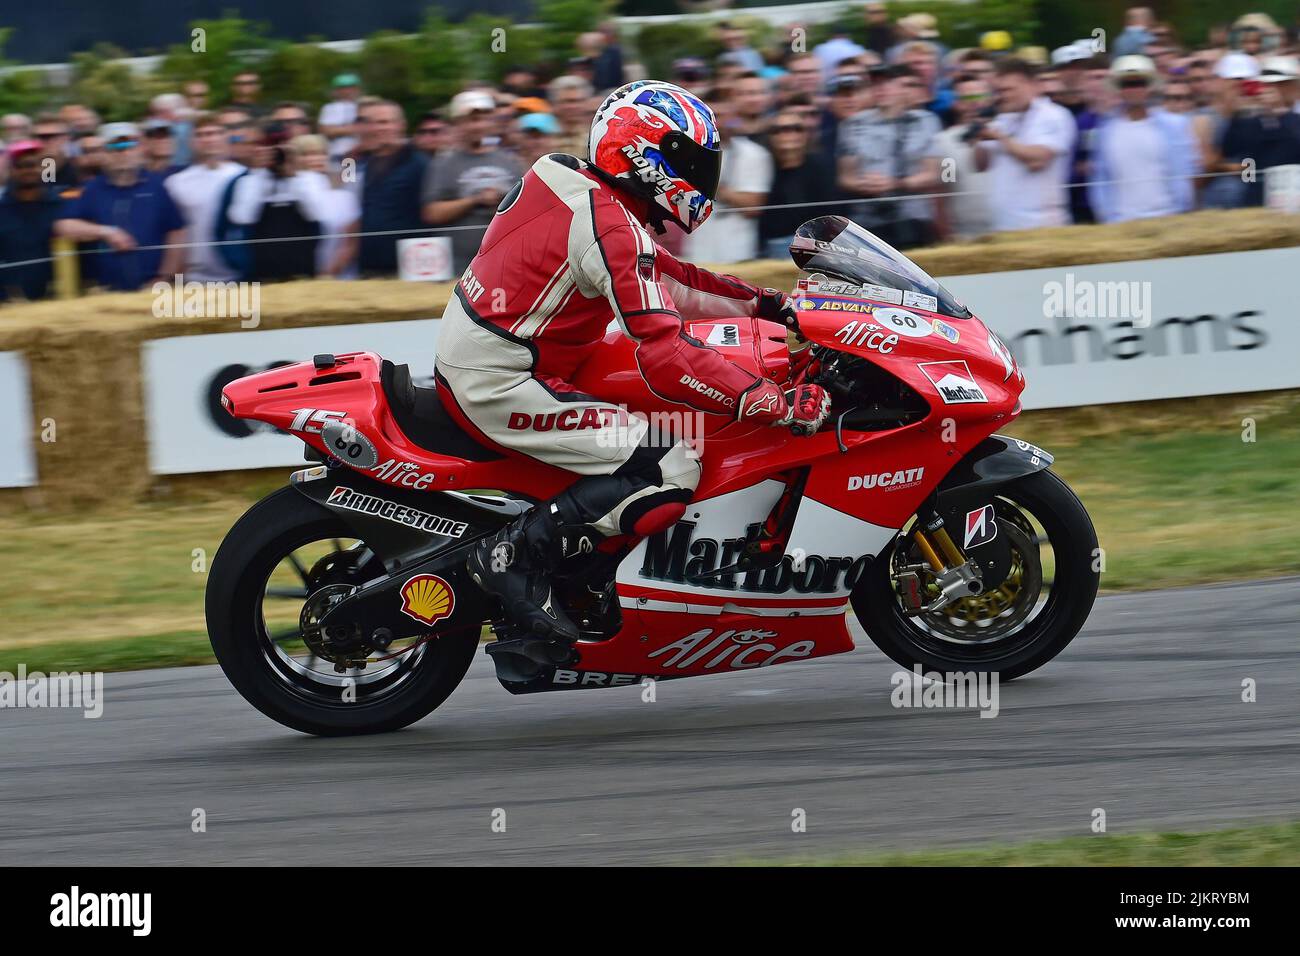 Andy Caddick, Shaun Goverd, Ducati GP6 Desmosedici, Two-Wheel Grand Prix Heroes, iconic racing motorcycles from the late 1940’s to 2021, Goodwood Fest Stock Photo